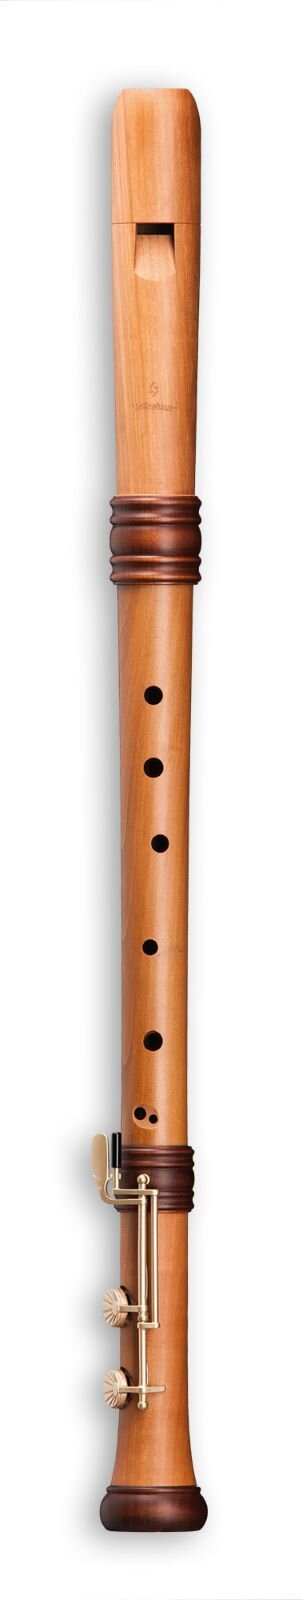 Mollenhauer Dream Flute by Adri Tenor Pear Tree Nature Double Hole with Double Key (4427) : photo 1